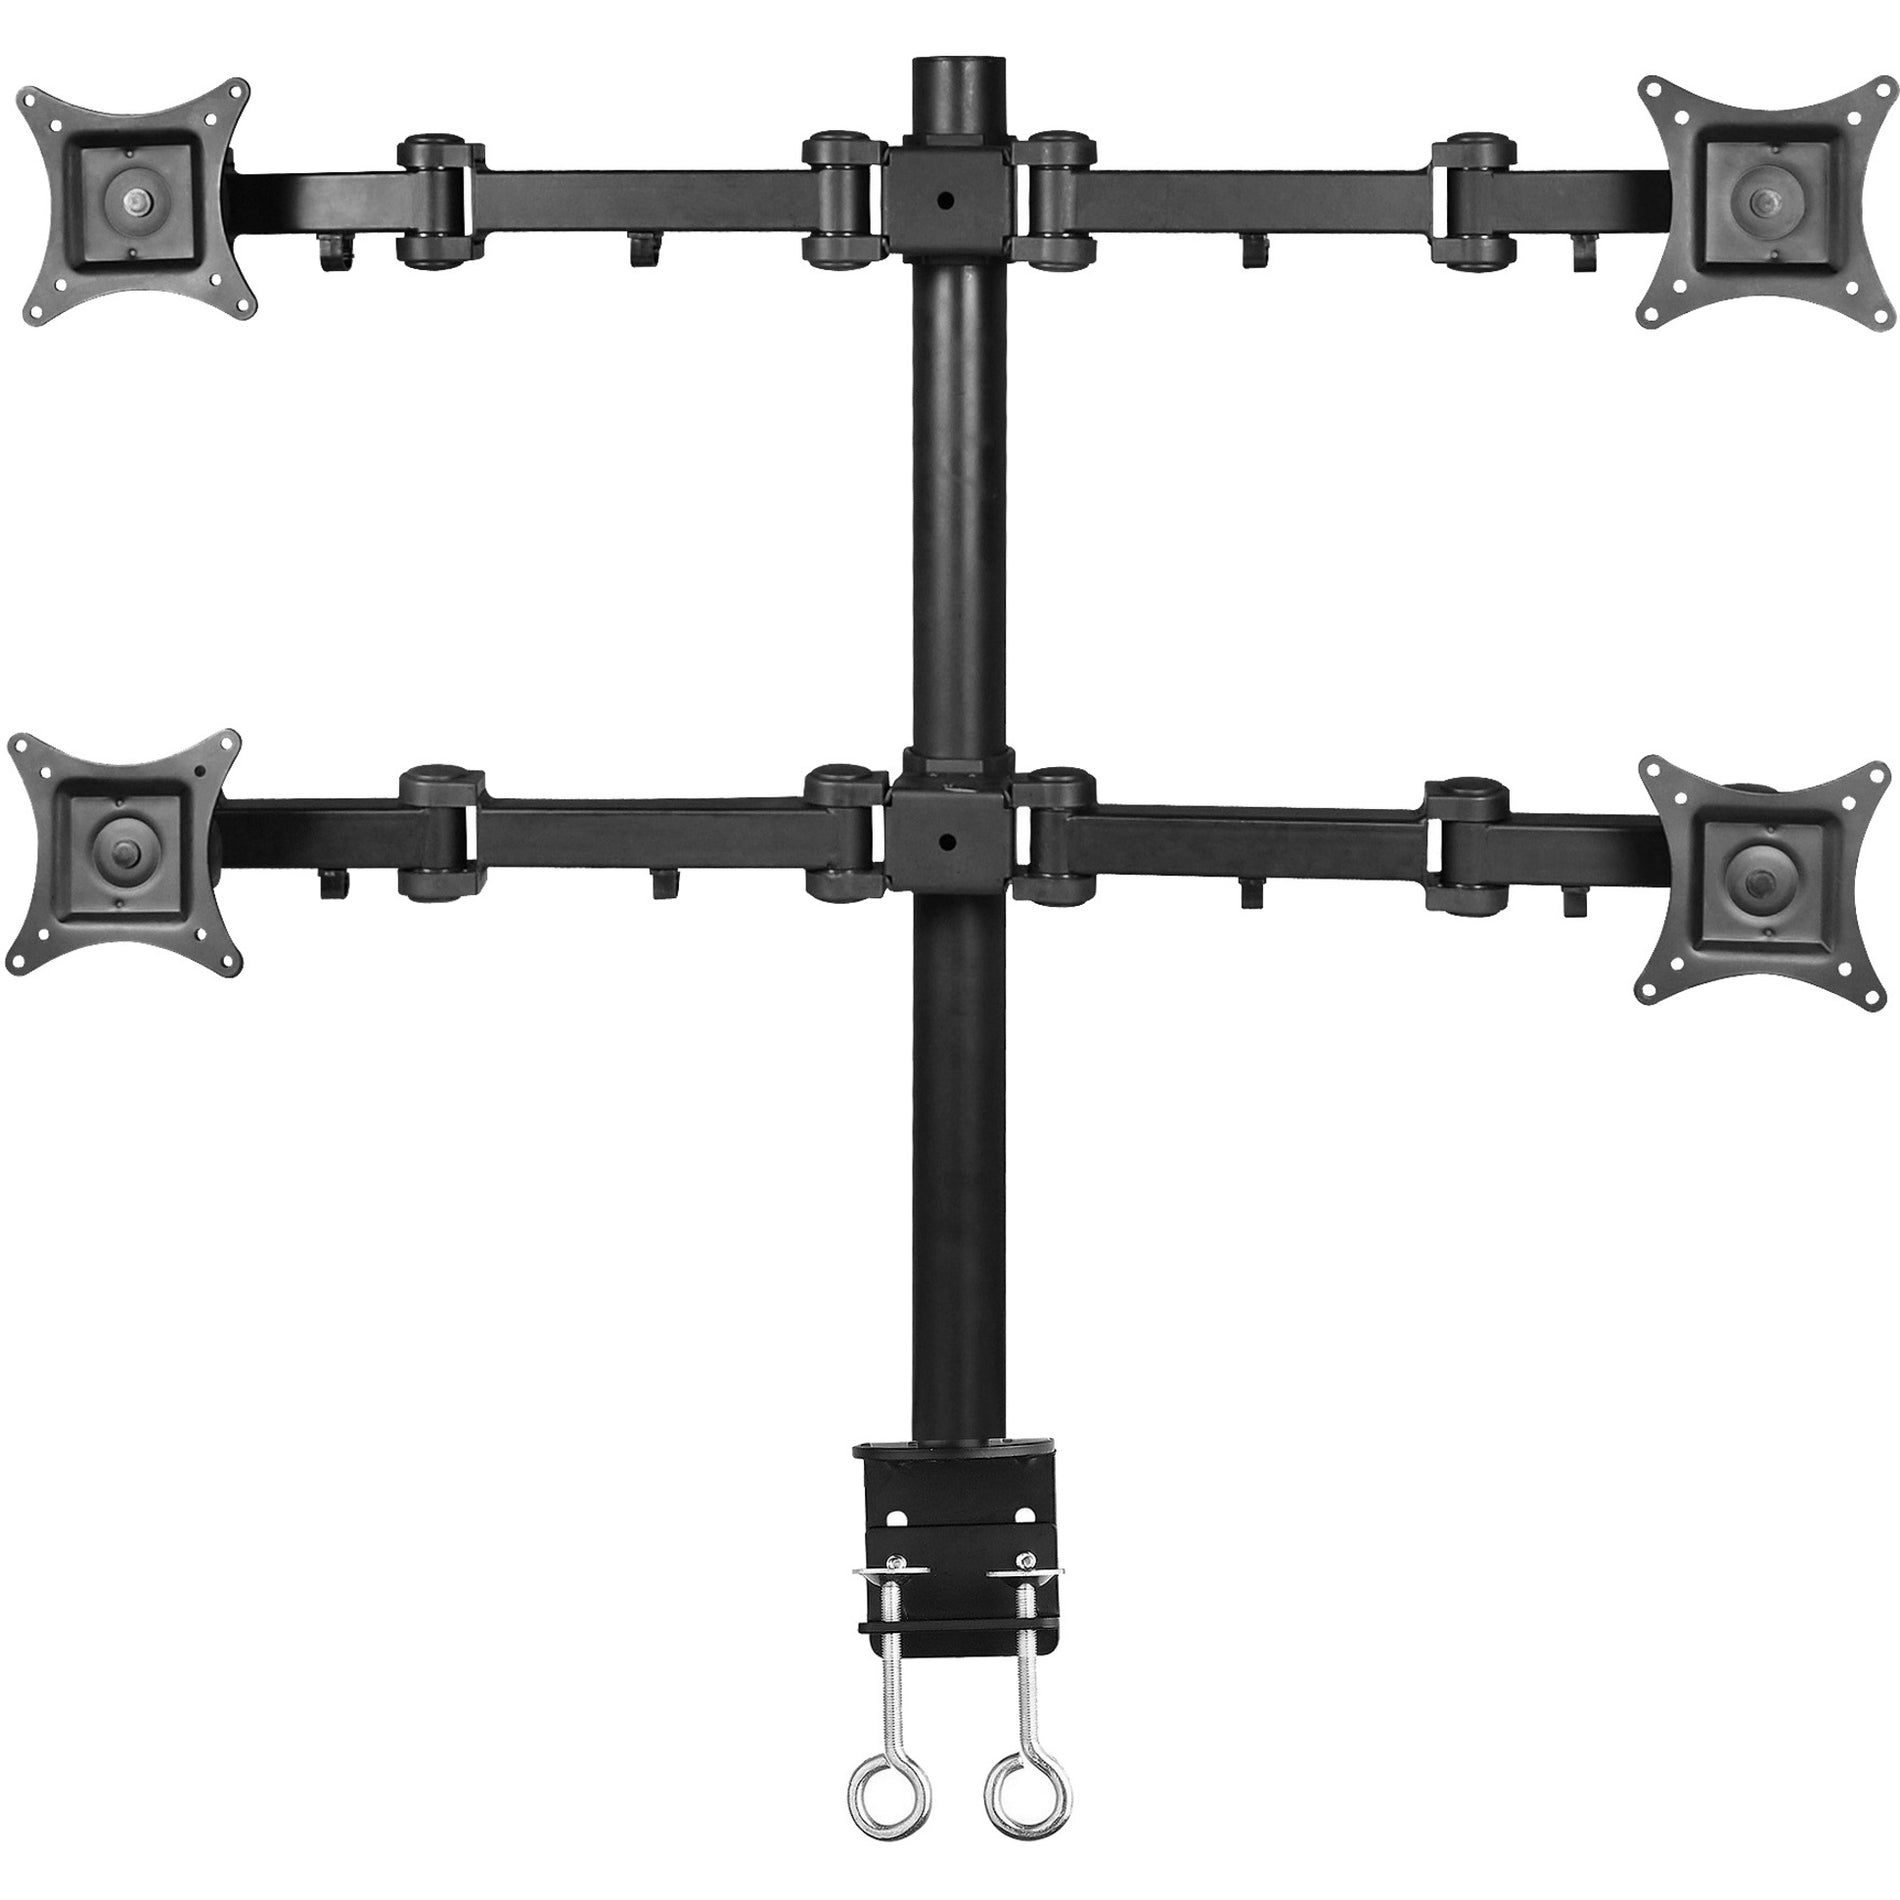 SIIG CE-MT0S12-S1 Articulating Quad Monitor Desk Mount, Frees Up Desk Space, 360° Rotation, Tilt and Swivel, Supports 13" to 27" Screens